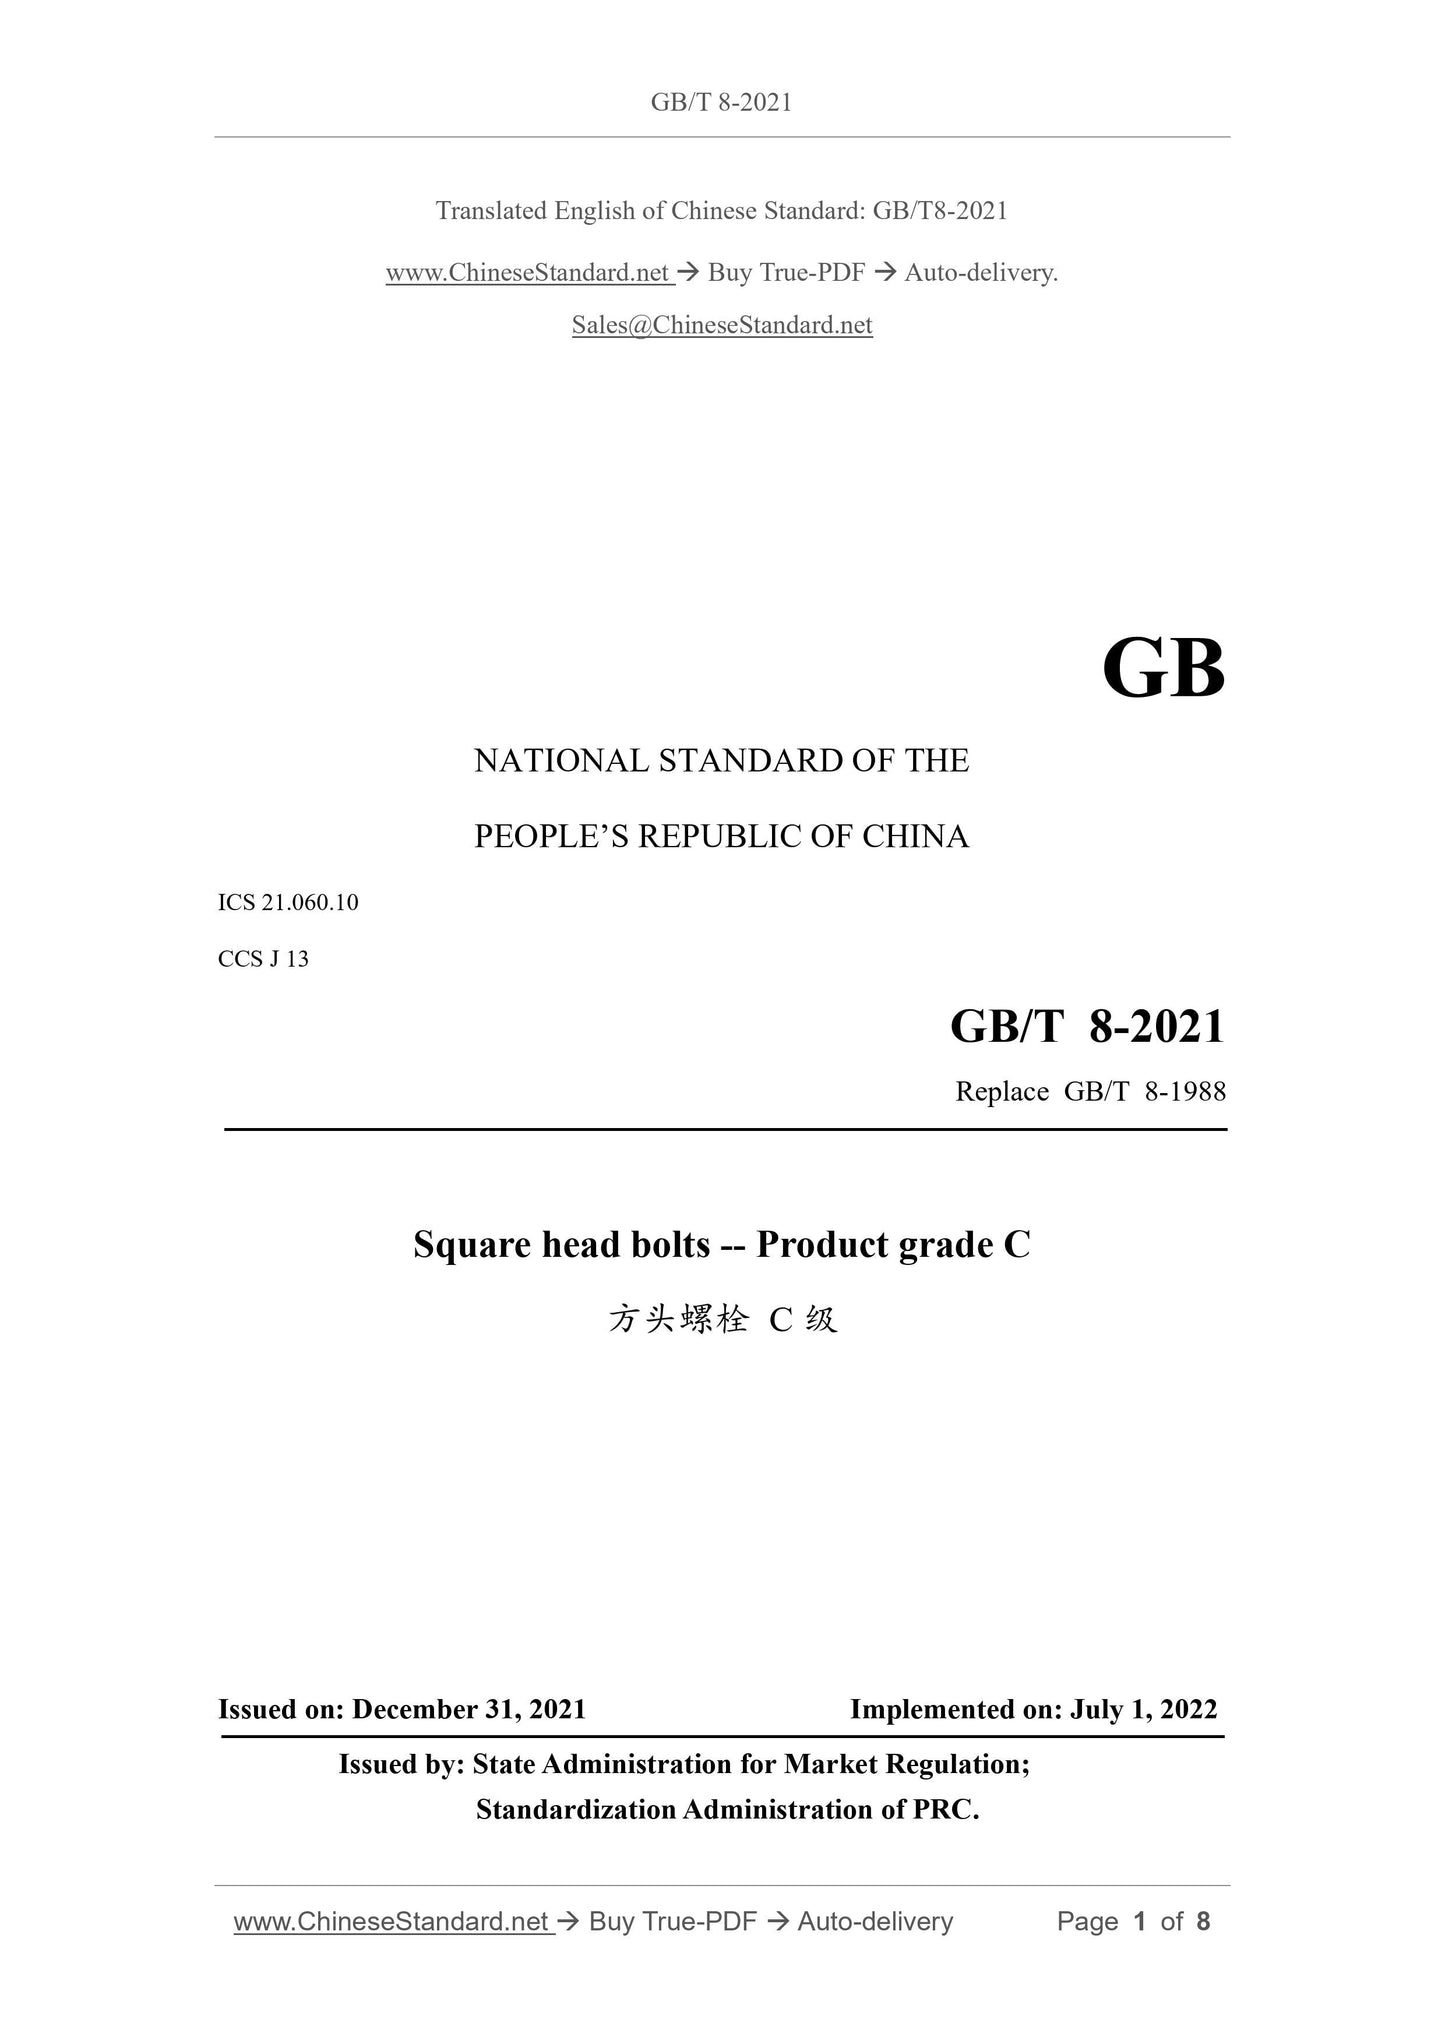 GB/T 8-2021 Page 1